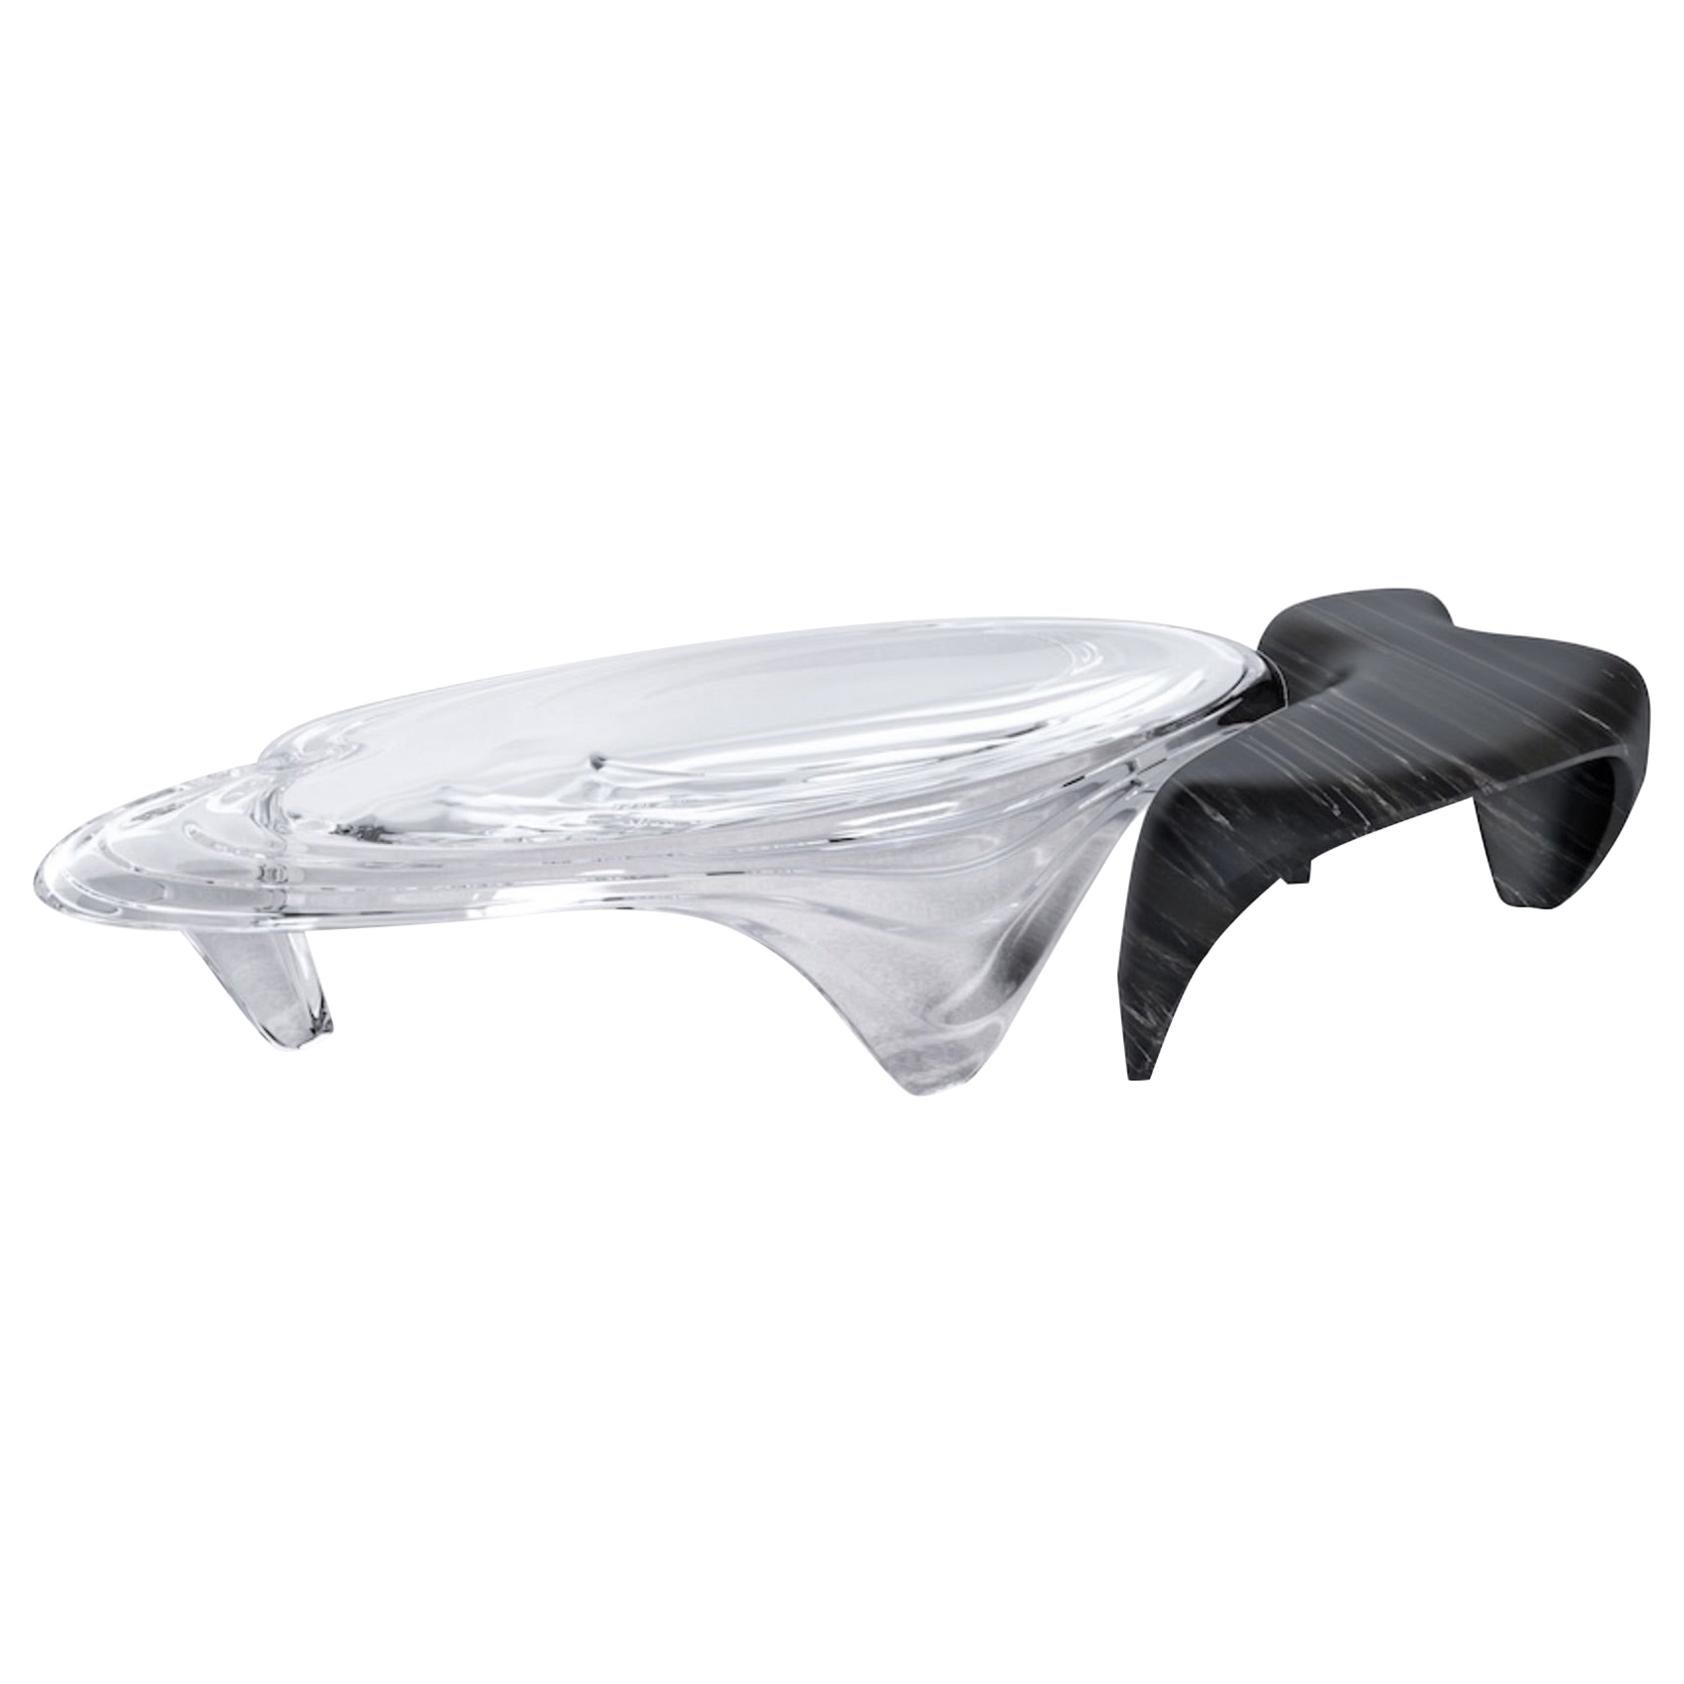 Contemporary Italian Marble Center Table with Polished Plexiglass by Zaha Hadid For Sale